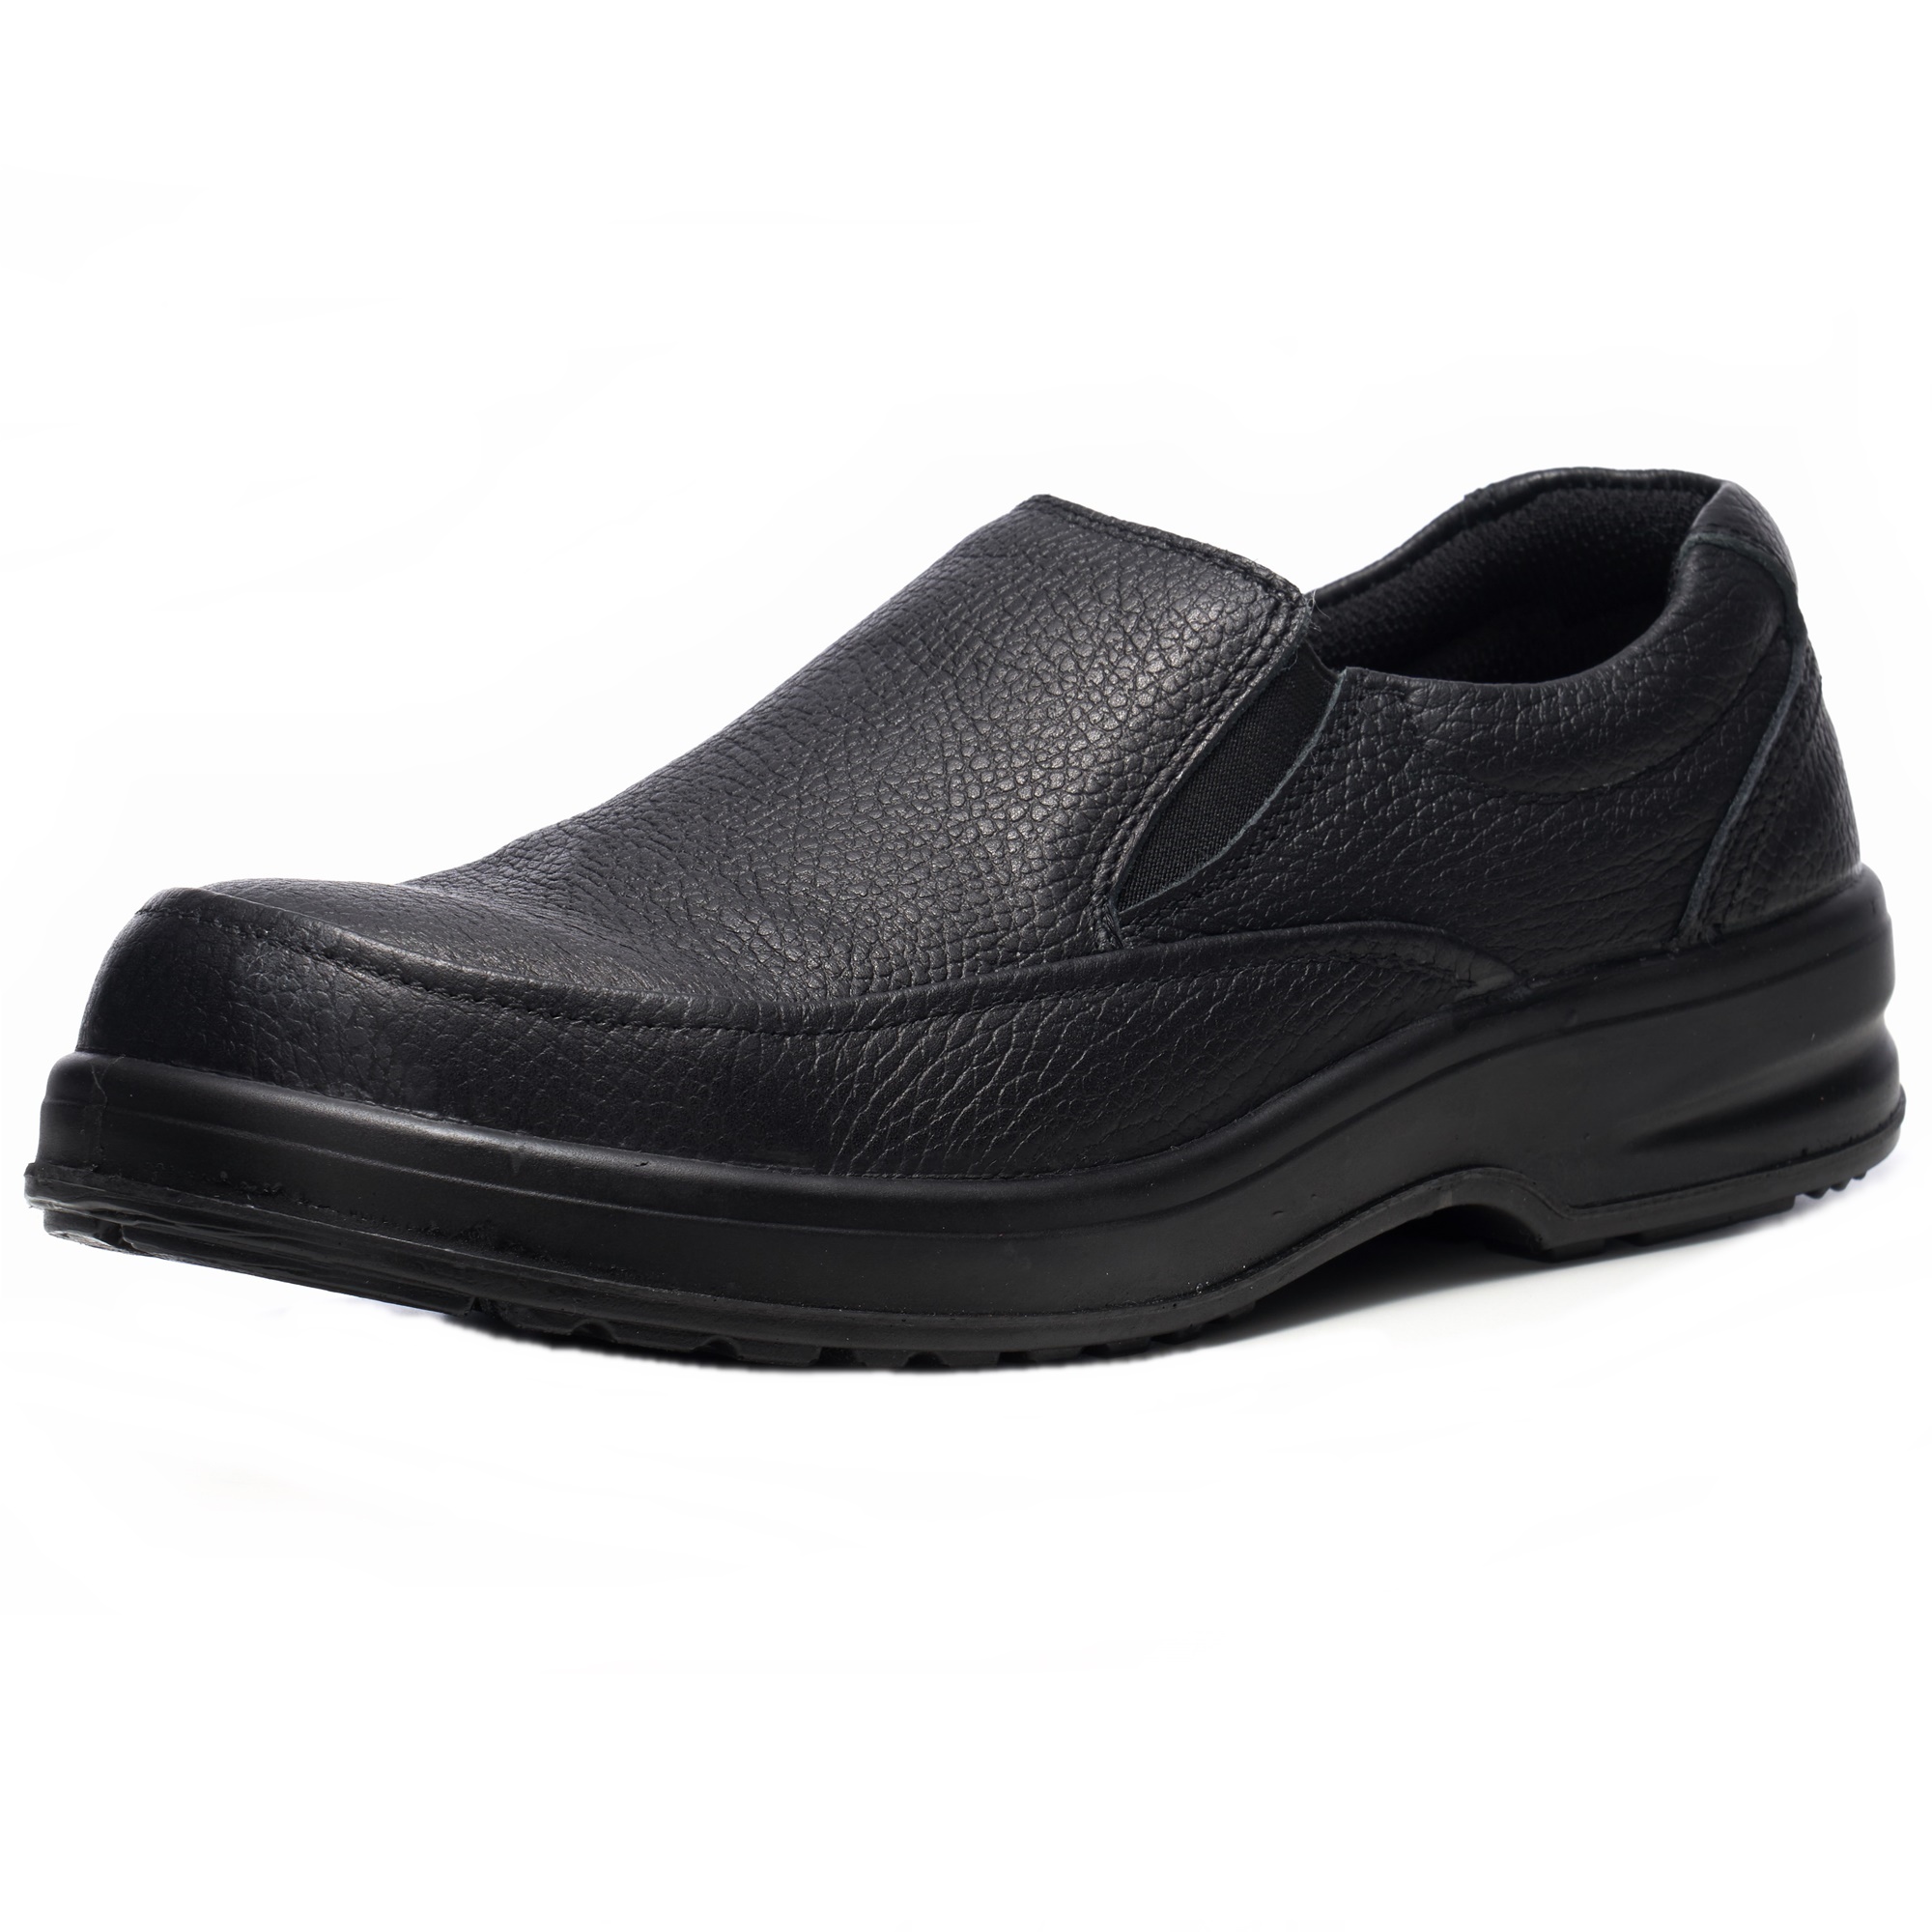 leather slip on work shoes